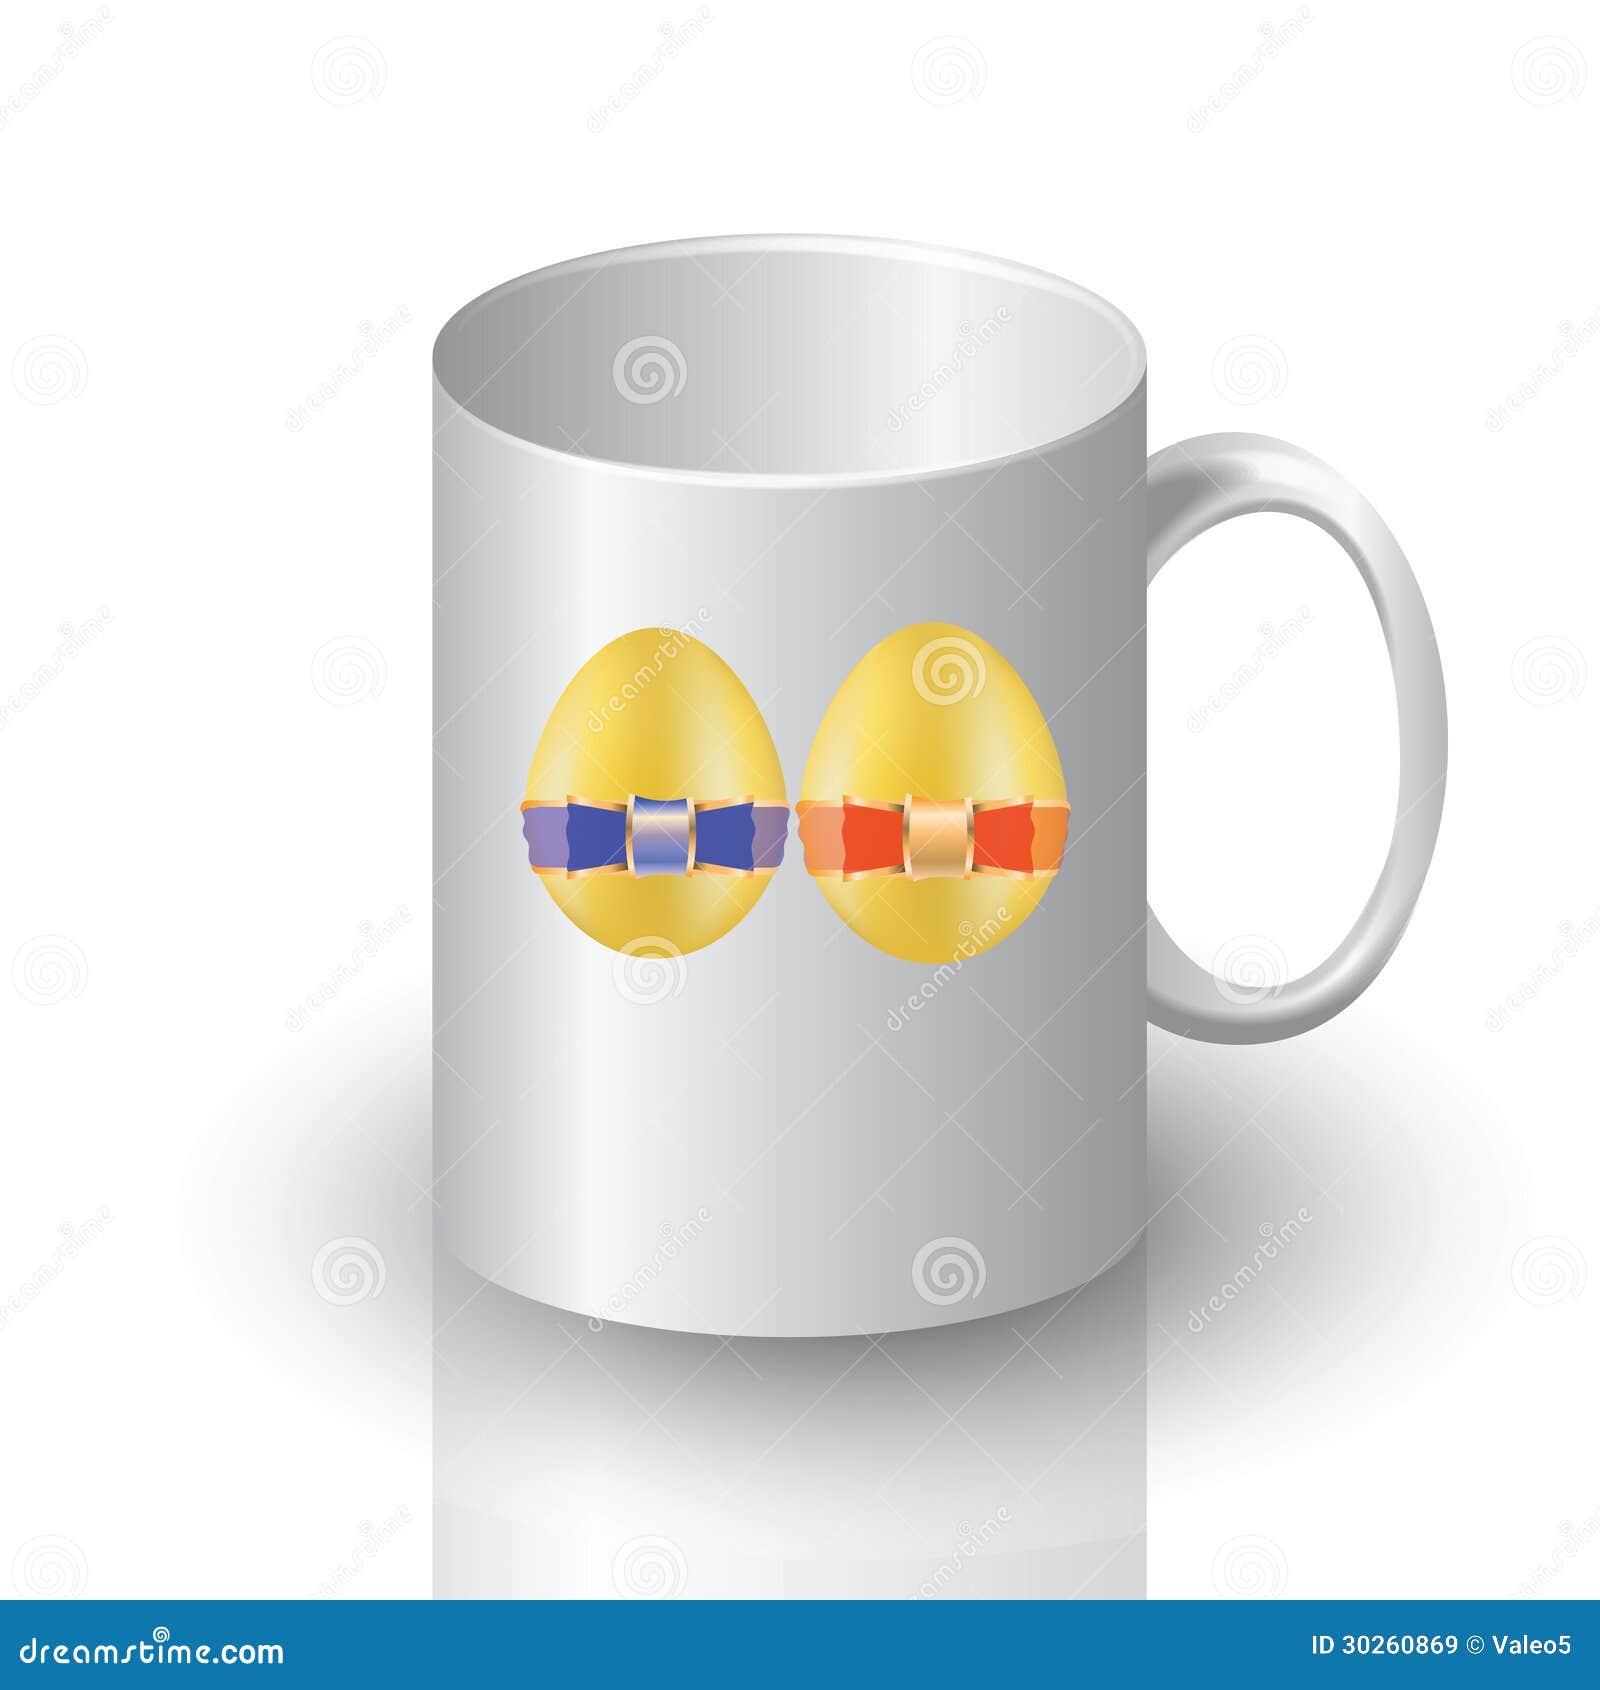 Easter mug stock vector. Illustration of cappuccino, traditional - 30260869